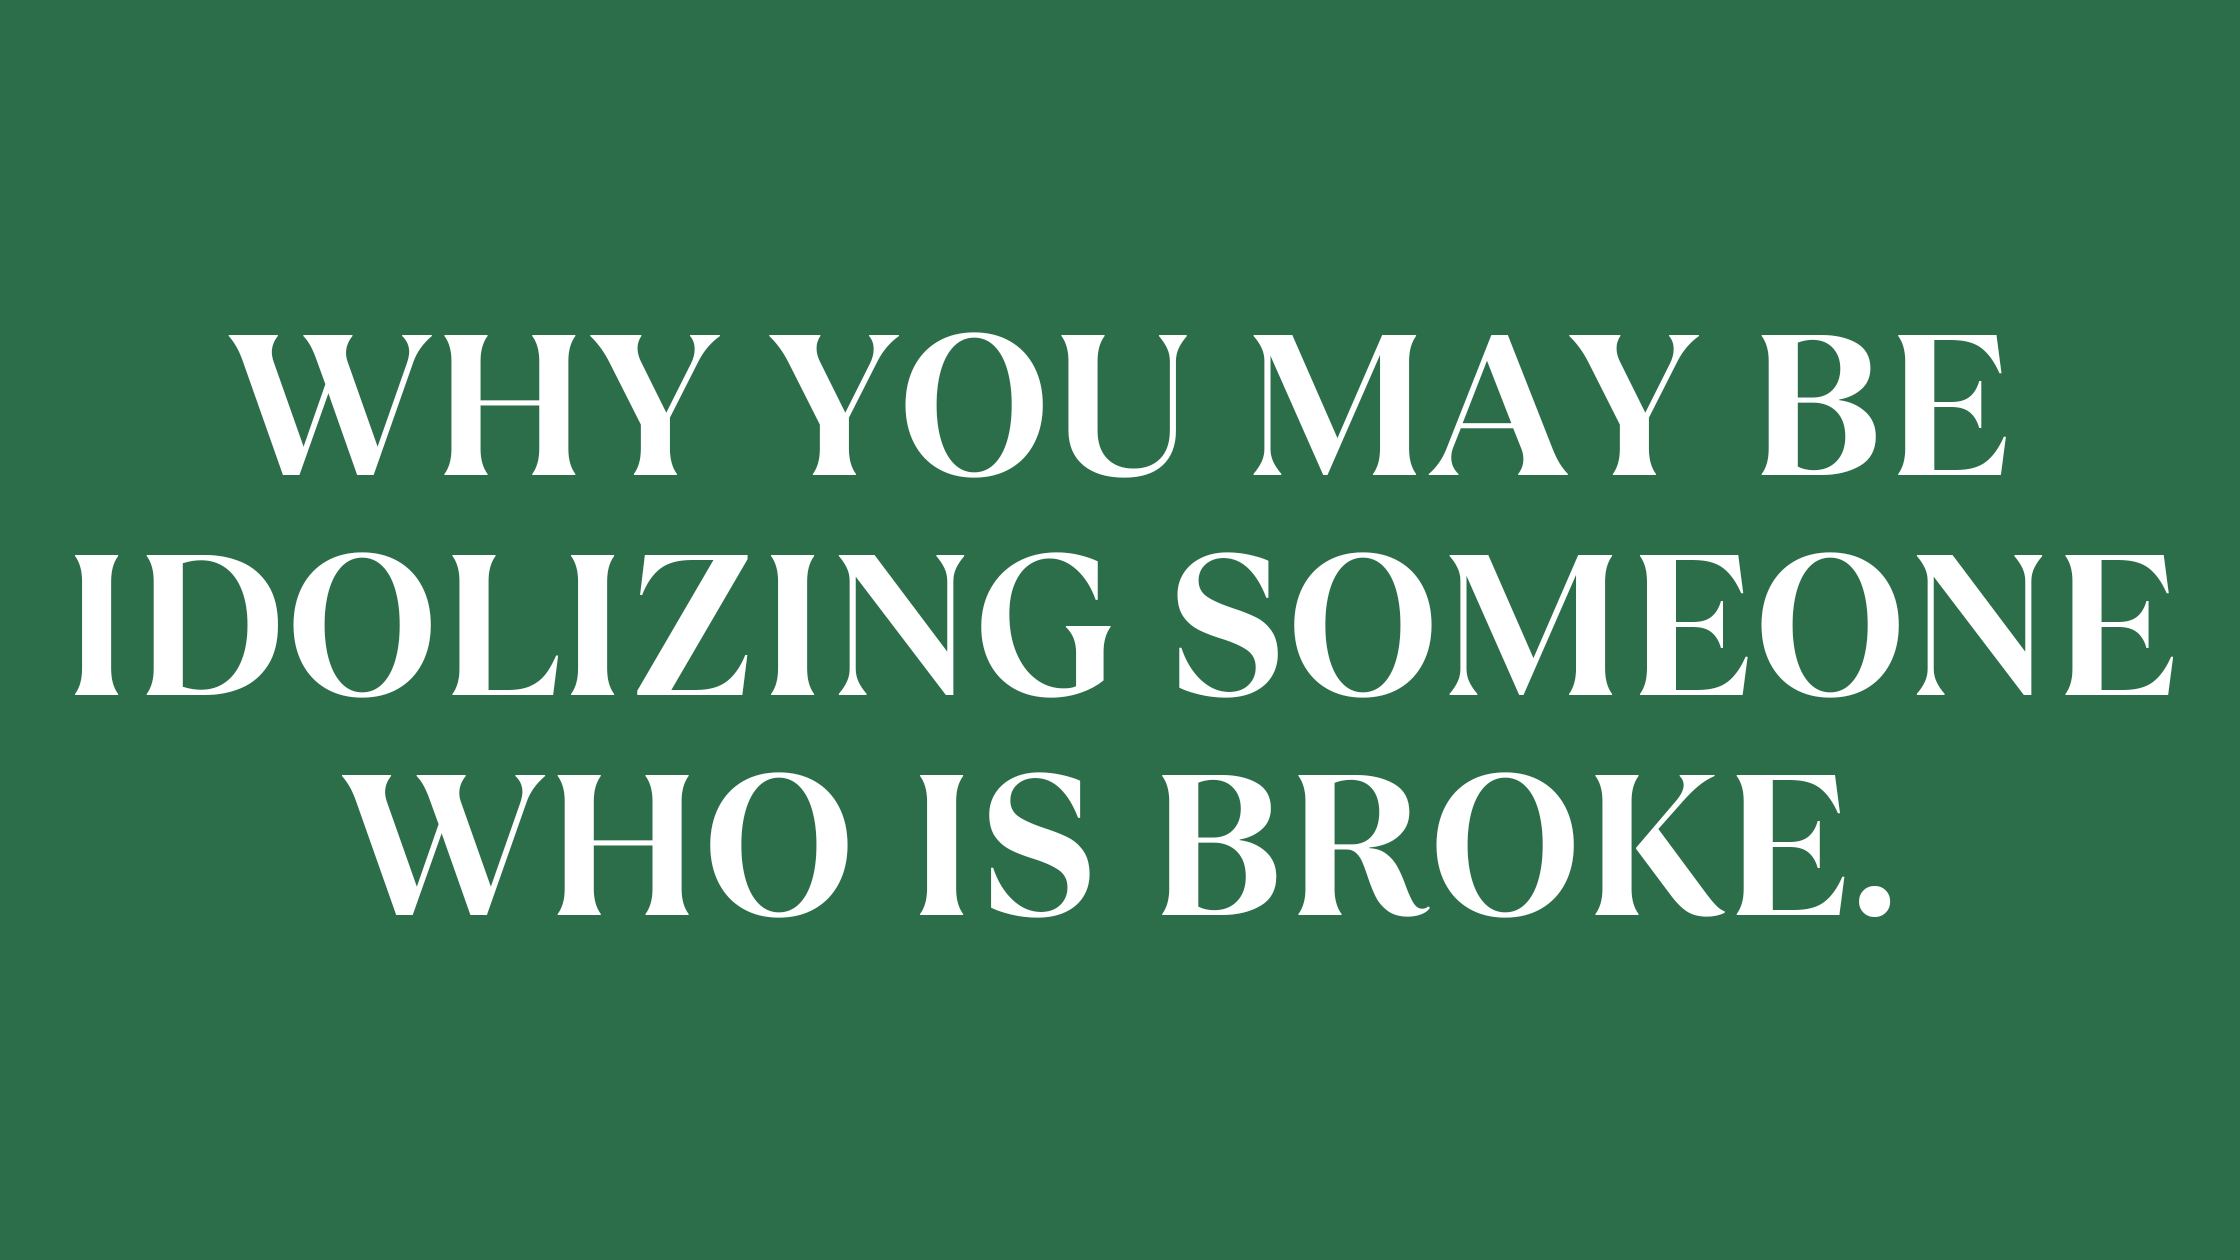 Why You May Be Idolizing Someone Who is BROKE.